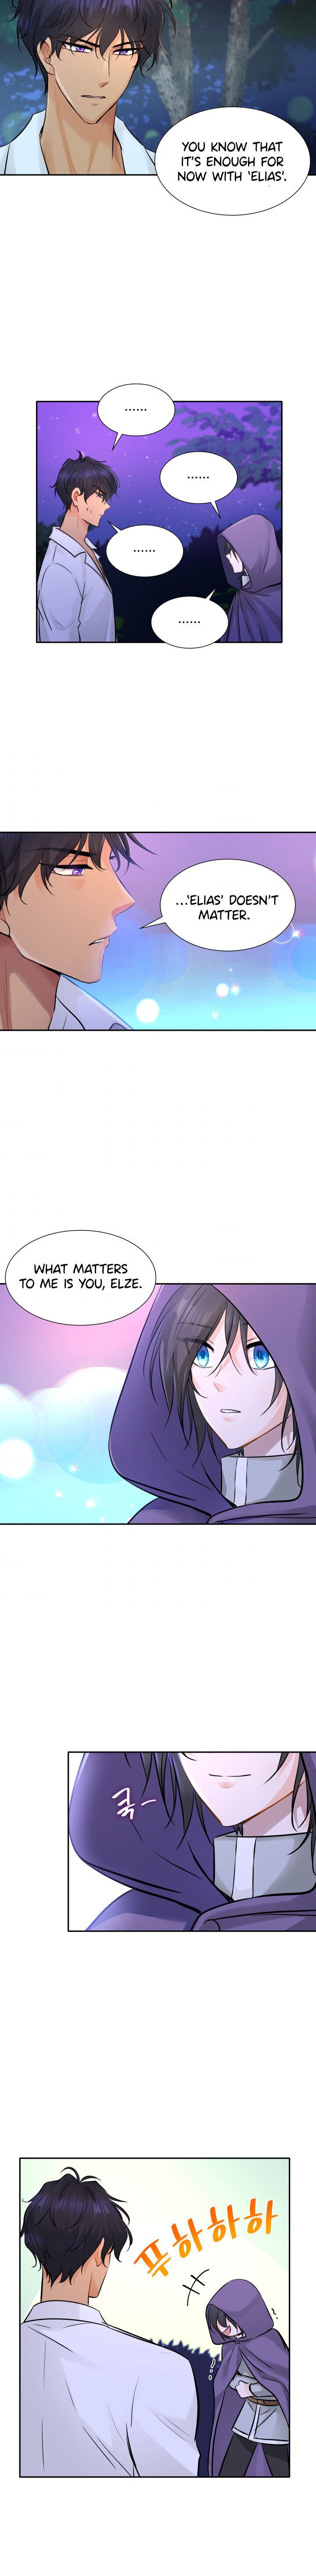 Marriage and Sword chapter 4